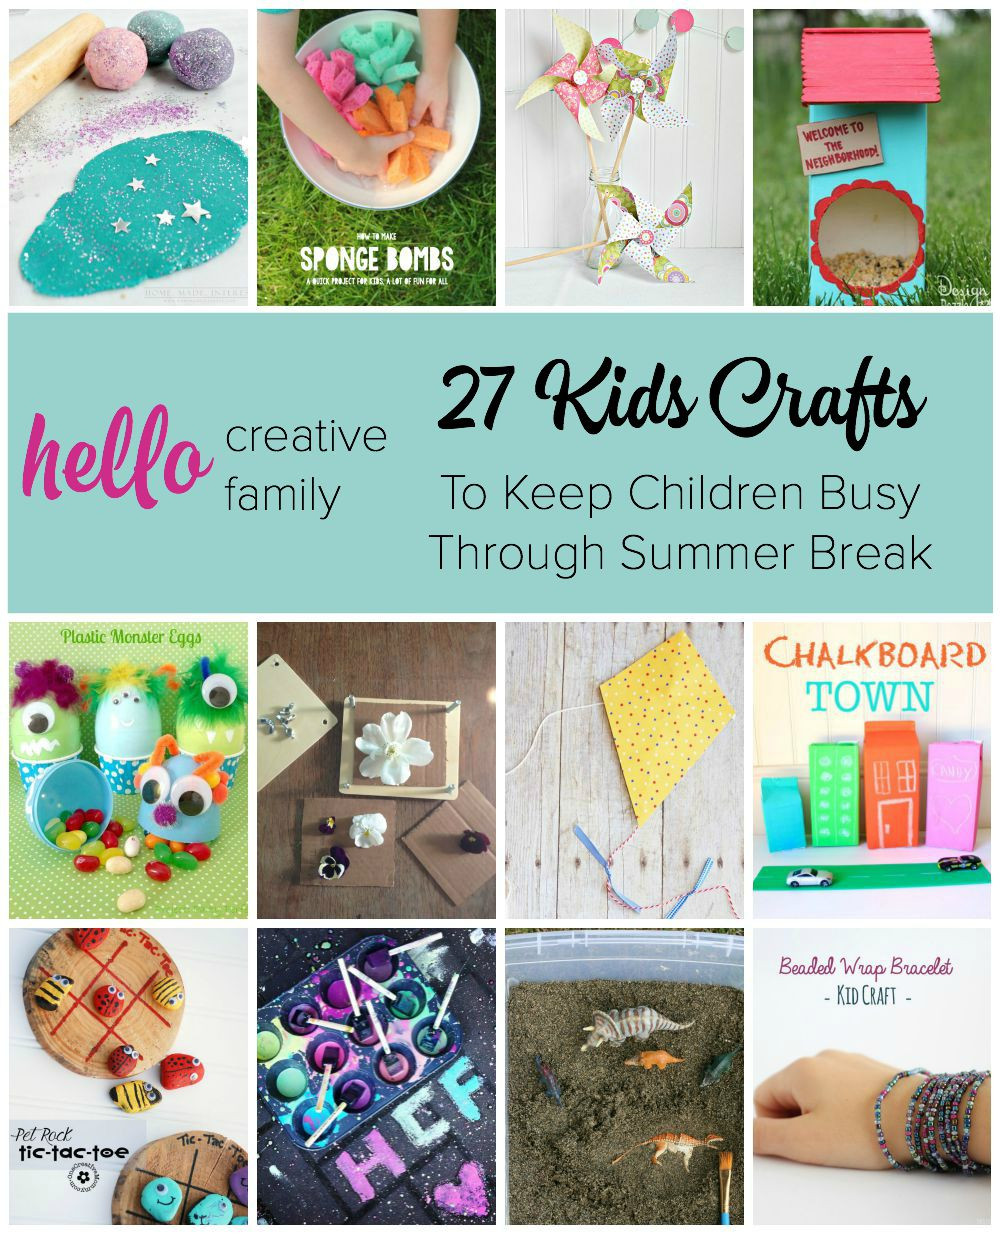 Creative Projects For Kids
 27 Kids Crafts to Keep Children Busy Through Summer Break